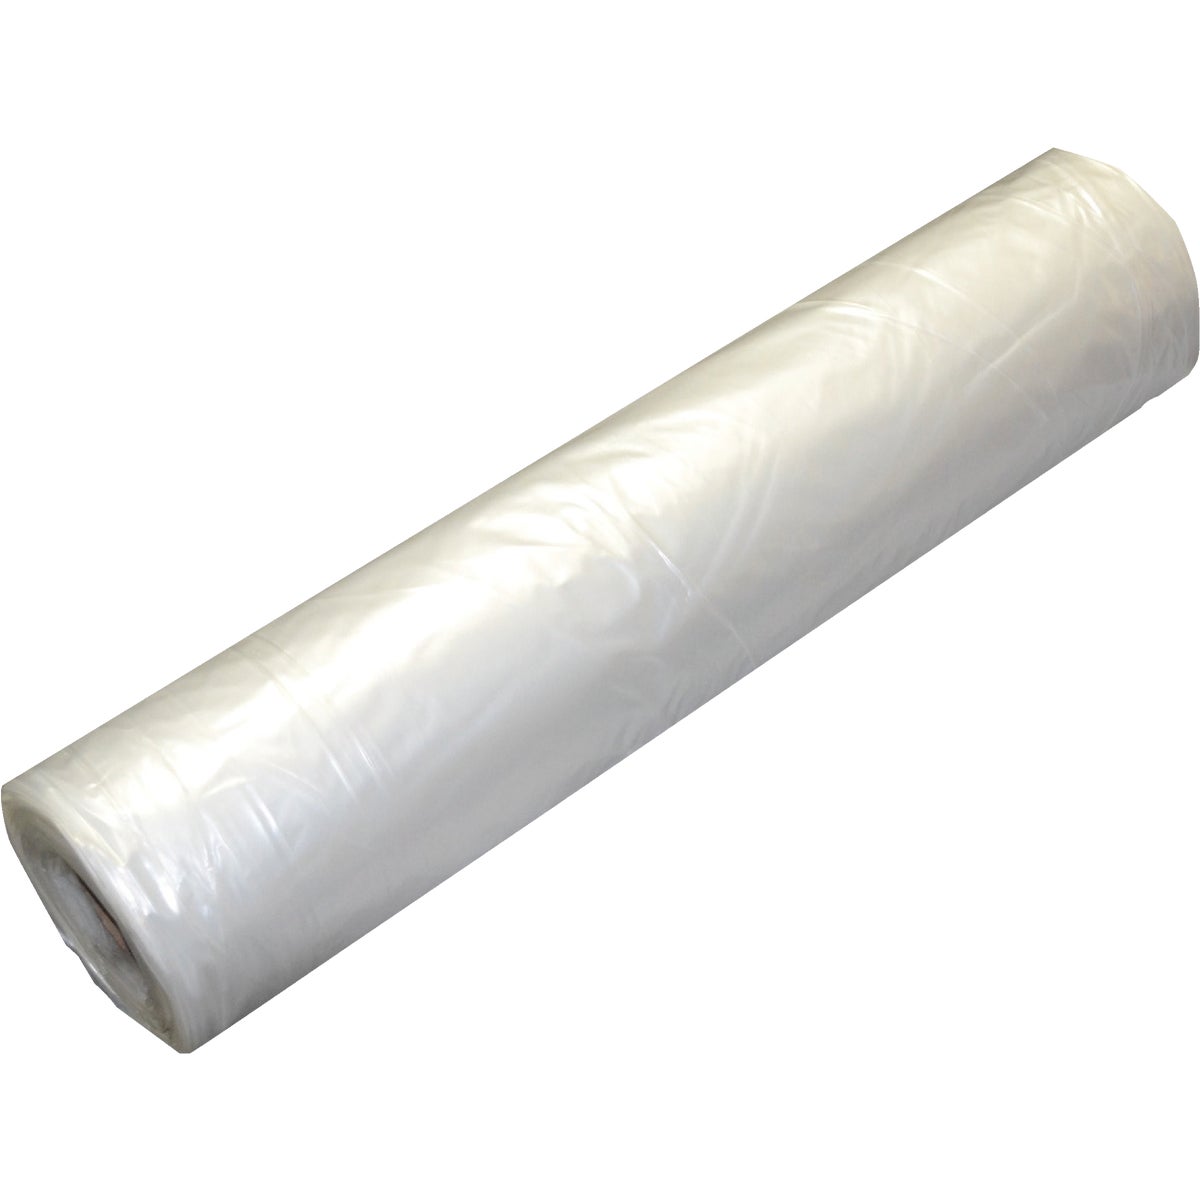 Reinforced Plastic Sheeting